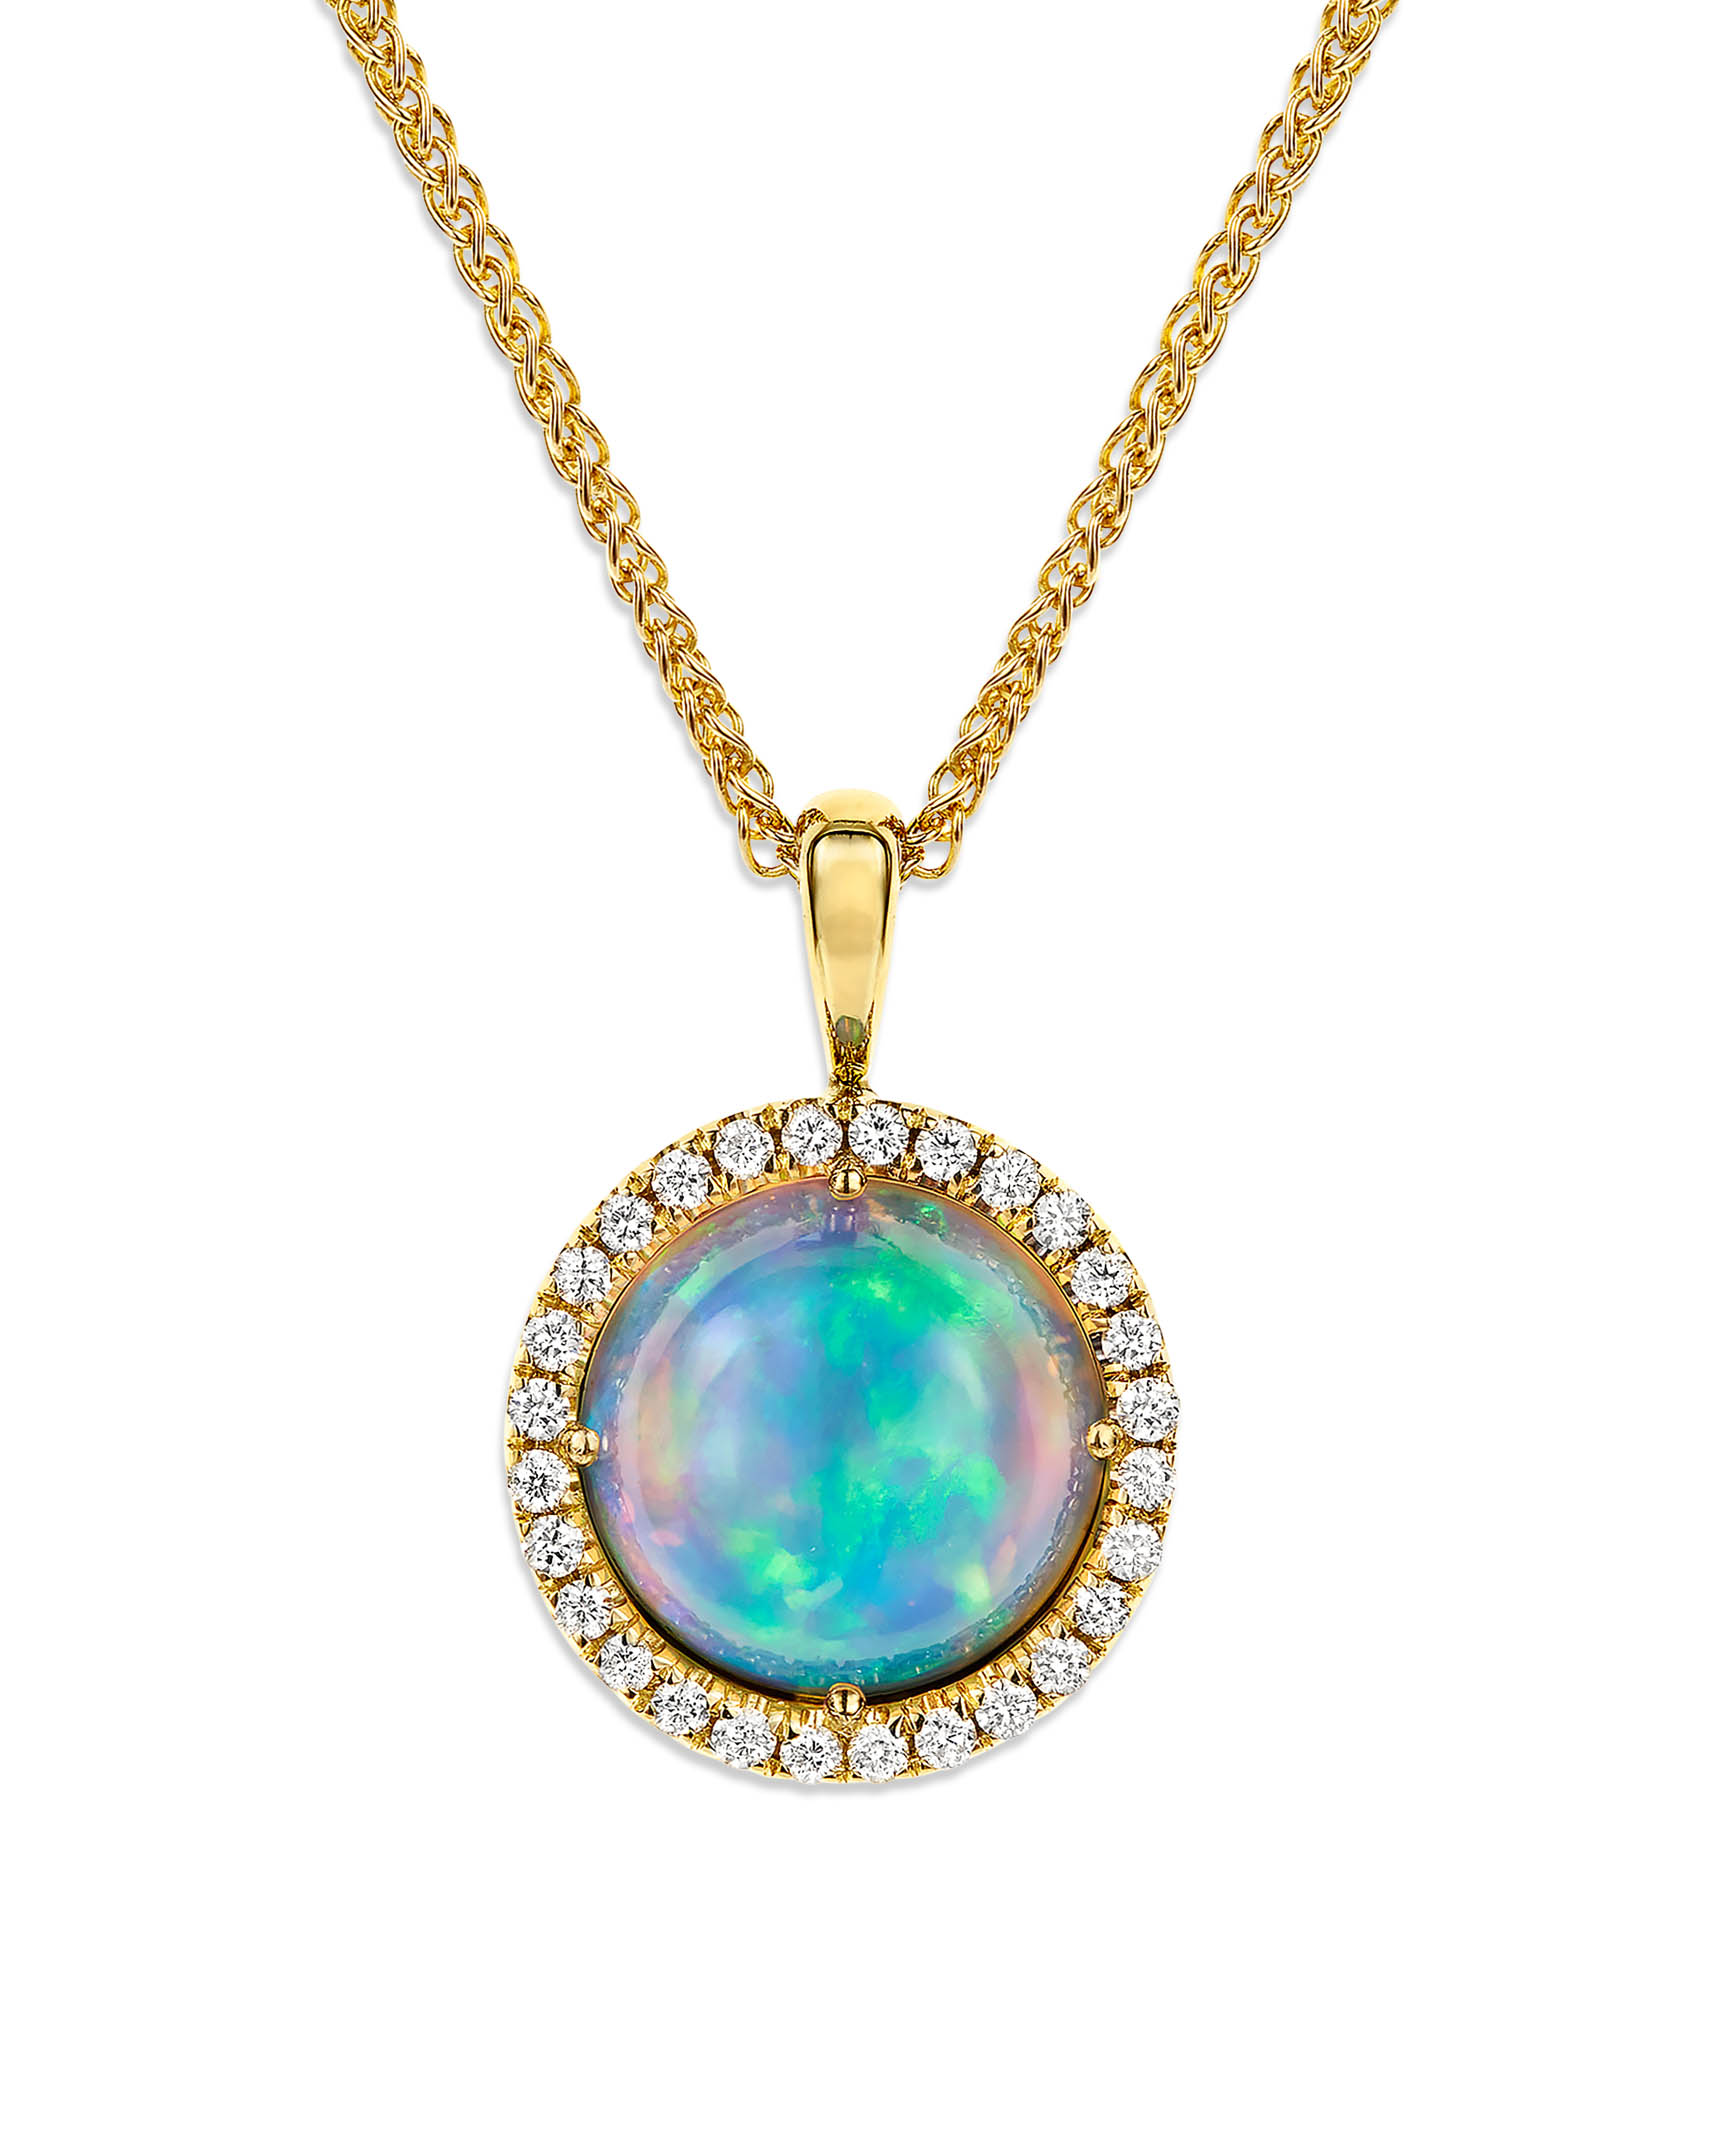 14k Yellow Gold Faceted Pear Shape Ethiopian Opal Pendant - Dianna Rae  Jewelry